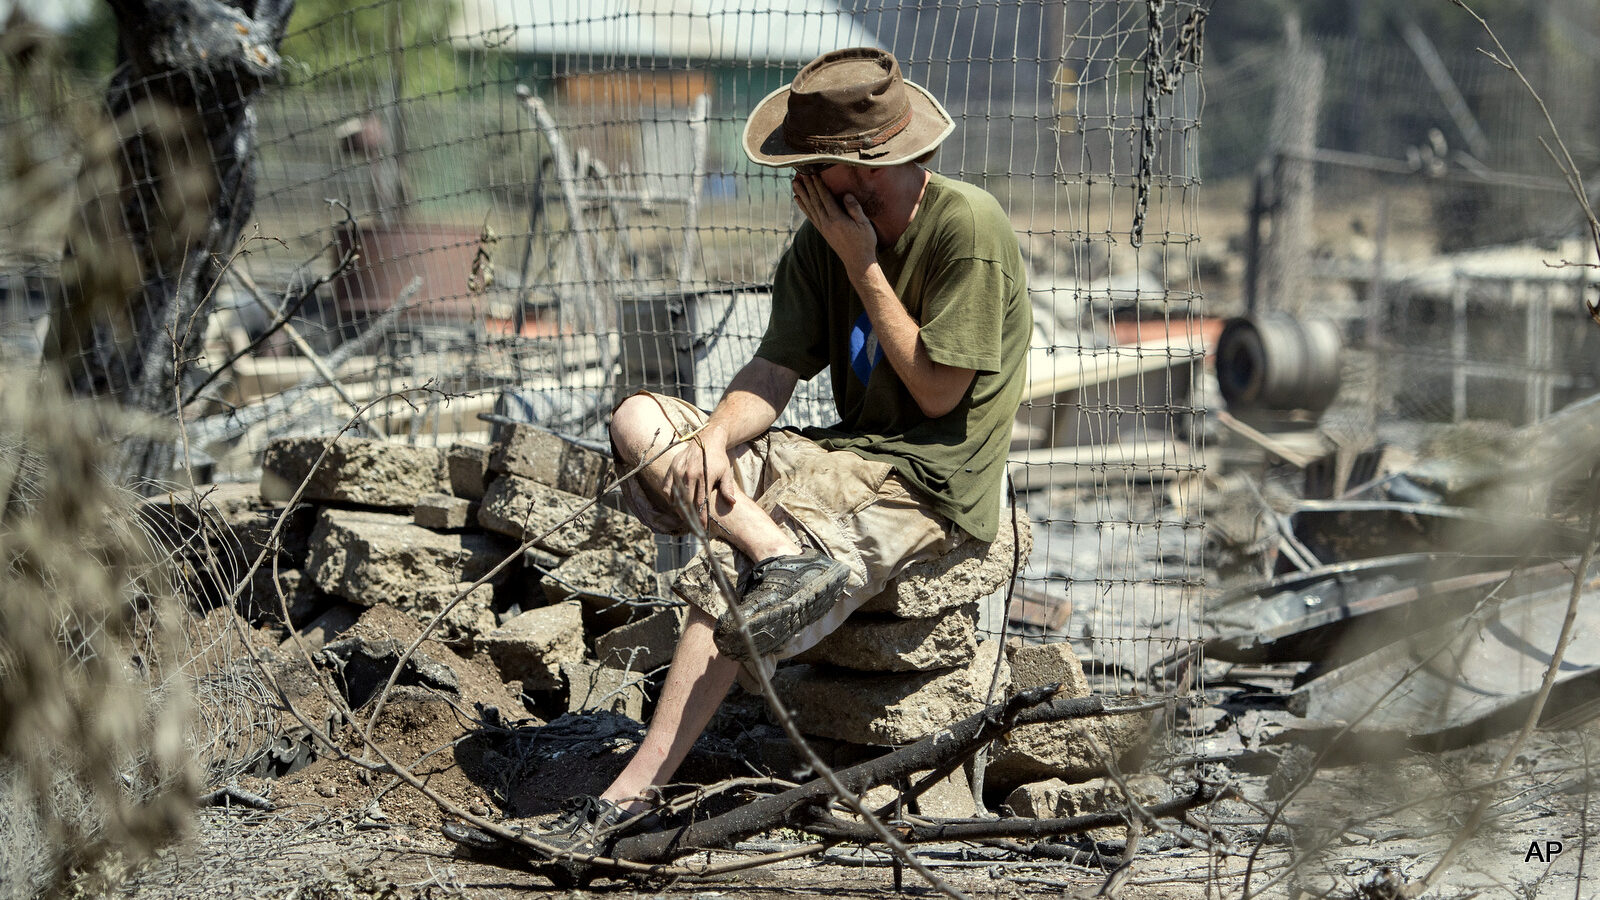 James McCauley weeps as he views the burned out remains of his home in Lower Lake, Calif., Monday, Aug. 15, 2016. McCauley traversed a creek by boat and foot for a half mile to see the property.